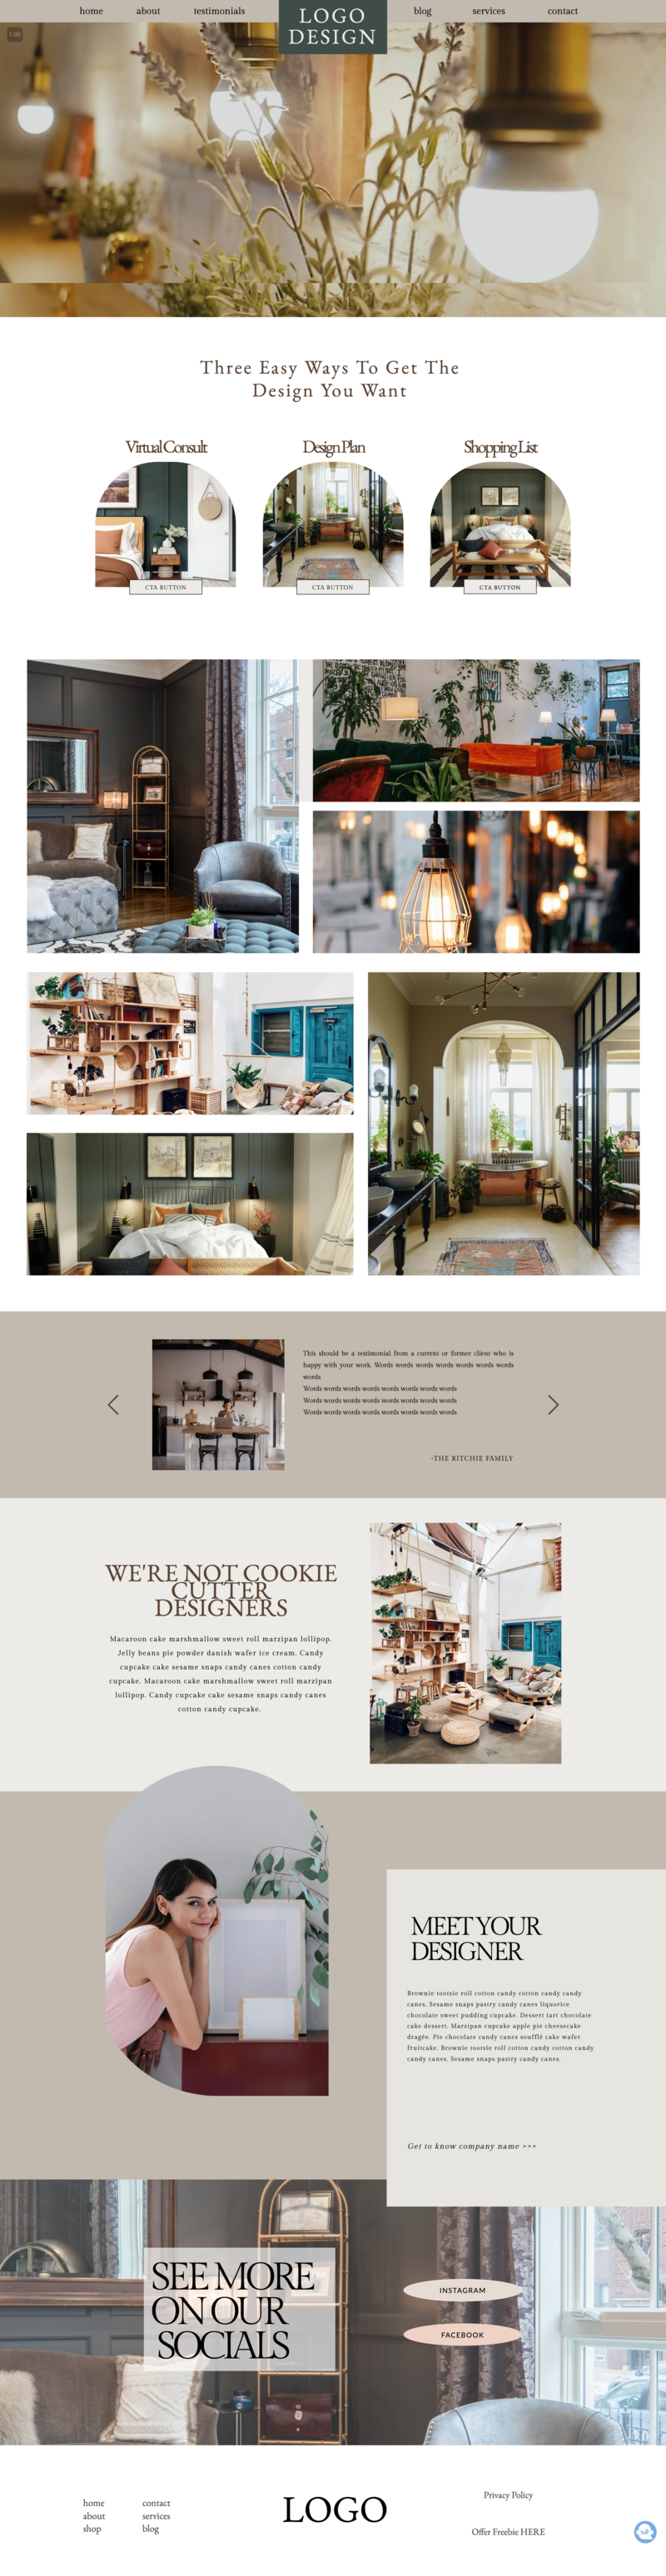 Sophisticated One Showit WebsiteTemplate